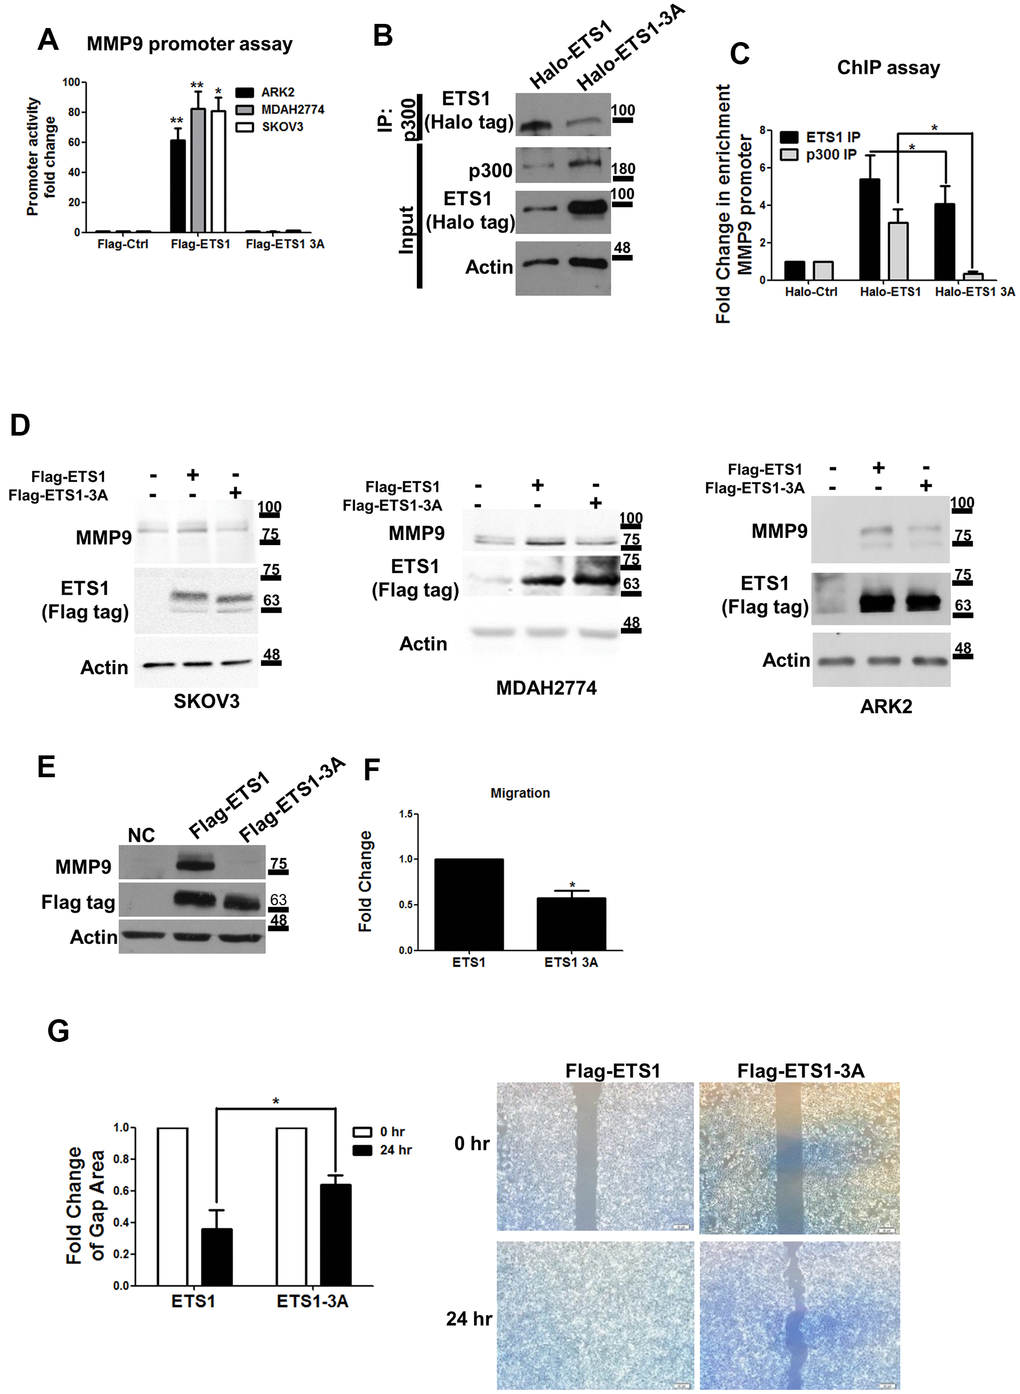 Mutant ETS1 is unable to activate MMP-9 expression. (A) MMP-9 promoter luciferase assays were co-transfected with the MMP-9 promoter construct using Flag-control, Flag-ETS1 or Flag-ETS1-3A in ARK2 (black box), MDAH2774 (gray box), and SKOV3 (white box) cells 48 h later. The MMP-9 promoter activity in transfected Flag-control cells was set as 1. Results are means ± standard errors of the mean from three independent experiments. (B) An anti-p300 antibody was able to precipitate Halo-ETS1 or Halo-ETS1-3A in overexpressing 293 cells. Halo-ETS1 or Halo-ETS1-3A in association with p300 was identified with an anti-Halo tag antibody. (C) ChIP assays were analyzed with Halo-ETS1, Halo-ETS1-3A, and endogenous p300 on the MMP-9 promoter in overexpressing 293 cells. Chromatin DNA was crosslinked with Halo-ETS1 or Halo-ETS1-3A and subsequently purified with a Halo-tag resin. Associated p300 was precipitated with an anti-p300 antibody. Enrichment of the MMP-9 promoter was identified by qPCR. Results are means ± standard errors of the mean from three independent experiments. (D) MMP-9 protein levels were increased by Halo-ETS1 or Halo-ETS1-3A in SKOV3, MDAH2774 and ARK2 cells. (E) MMP-9 expression was detected in 293 cells stably transfected Flag-ETS1. (F) The results of the transwell migration assay revealed that the migration ability of cells expressing wild-type ETS1 was higher than that of cells expressing ETS1-3A. Quantification of cell migration ability was performed by direct counting. (G) In wound closure assay, the cell-free gap area was quantified with the image J software (left panel). Cells characterized by higher migration ability produced smaller cell-free gap areas. Cell-free gap areas at 0 and 24 h are shown as open and black bars, respectively. Results in (F, G) are means ± standard errors of the mean from three independent experiments. Asterisks denote statistical significance (*p 